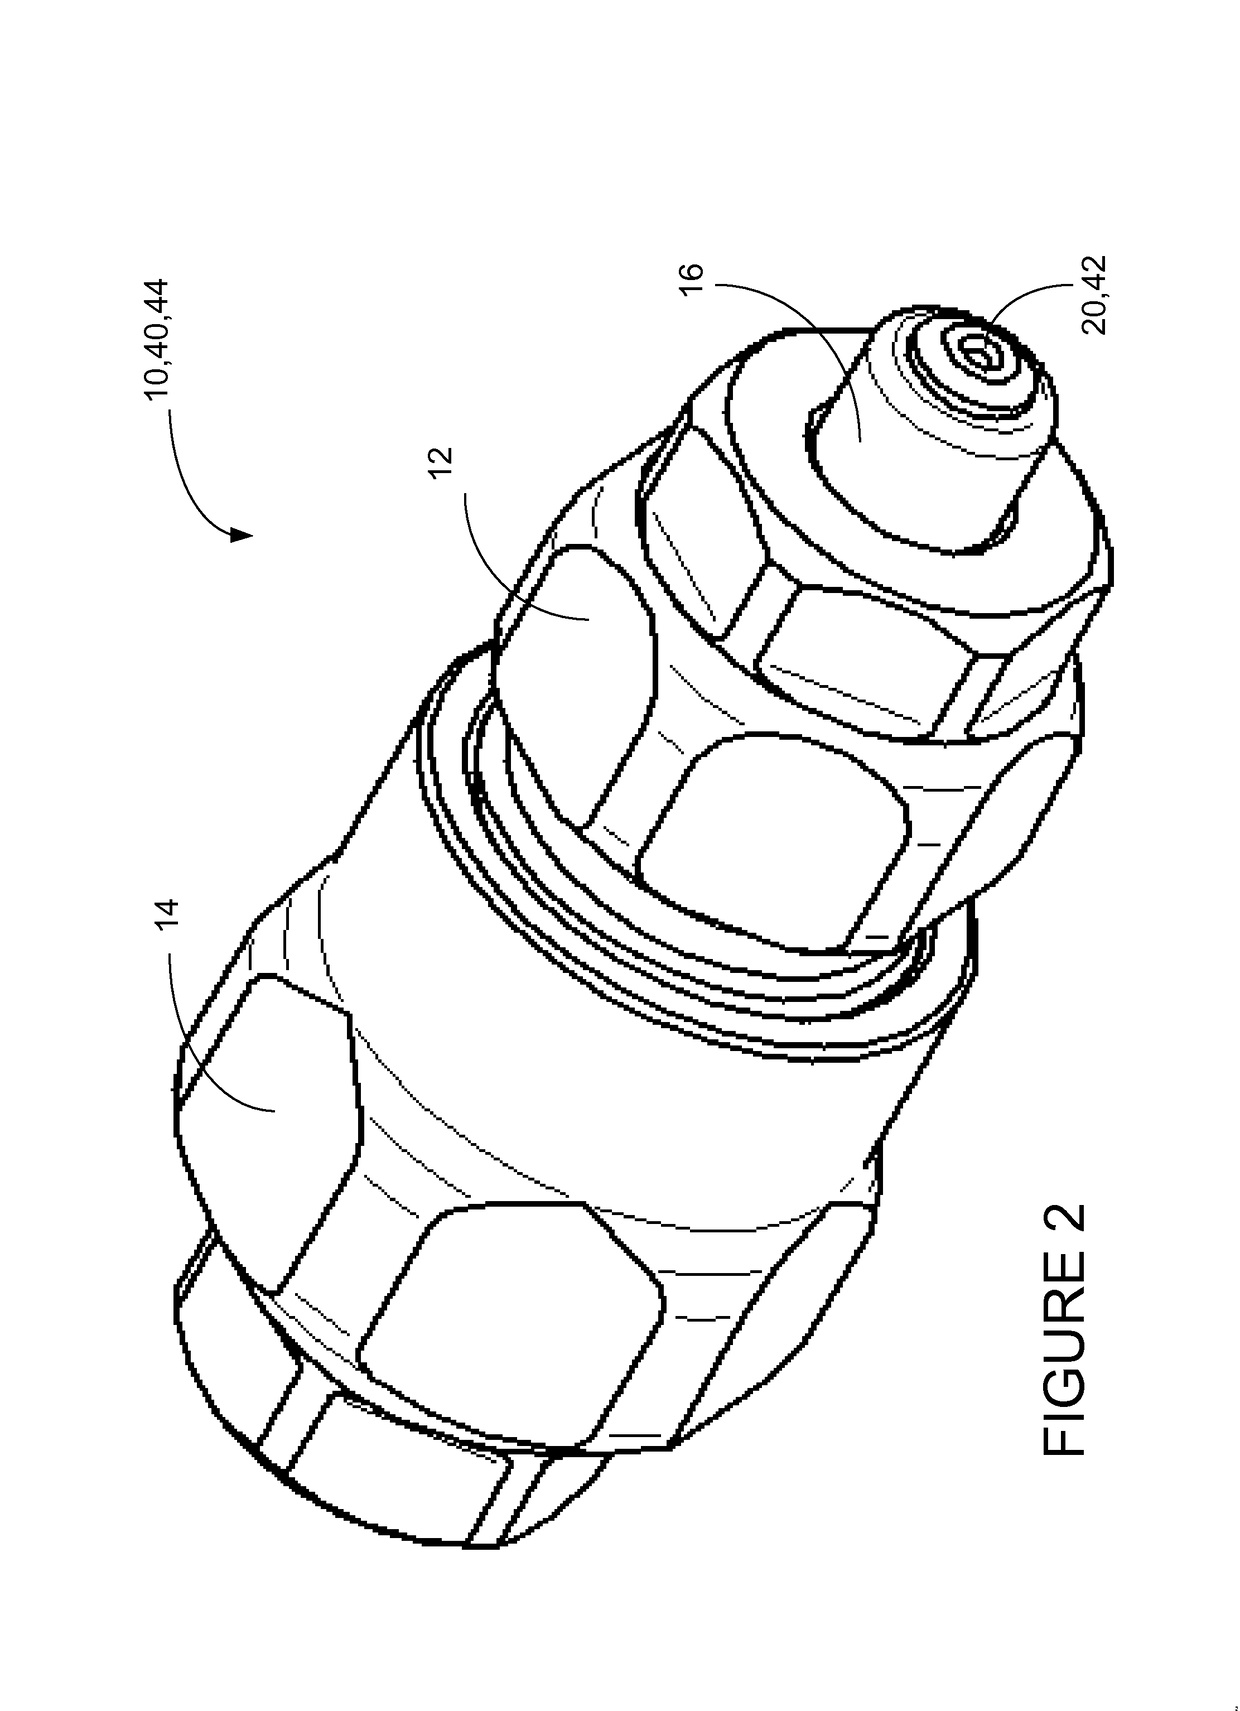 Cable lubrication device